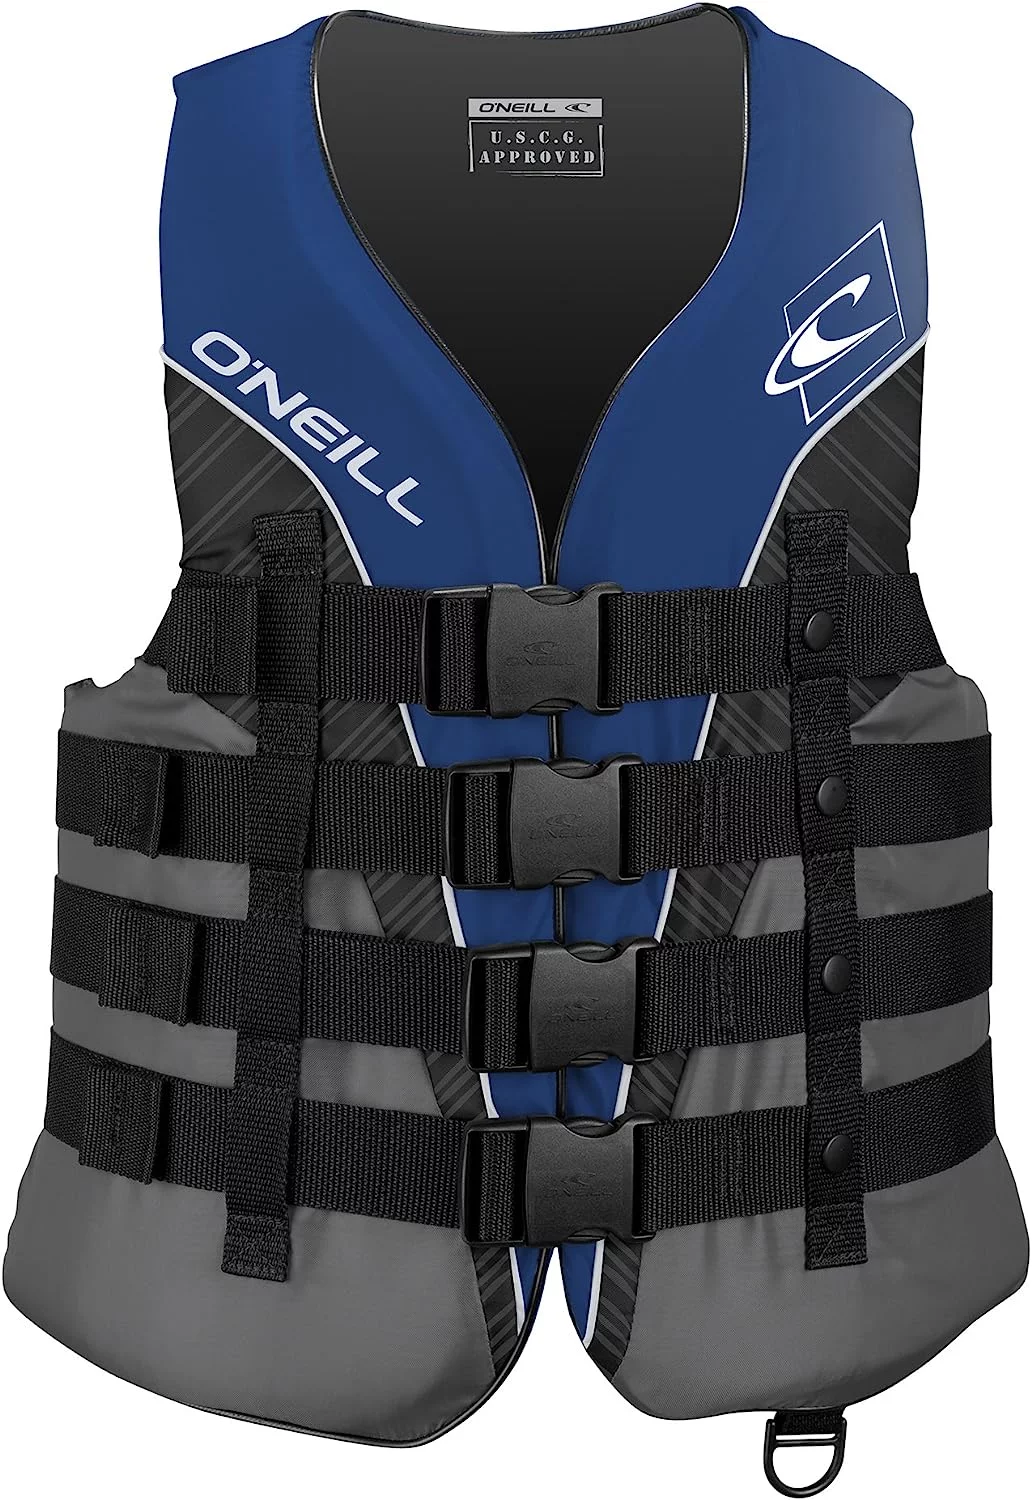 Best Life Vests/Jackets in the Market